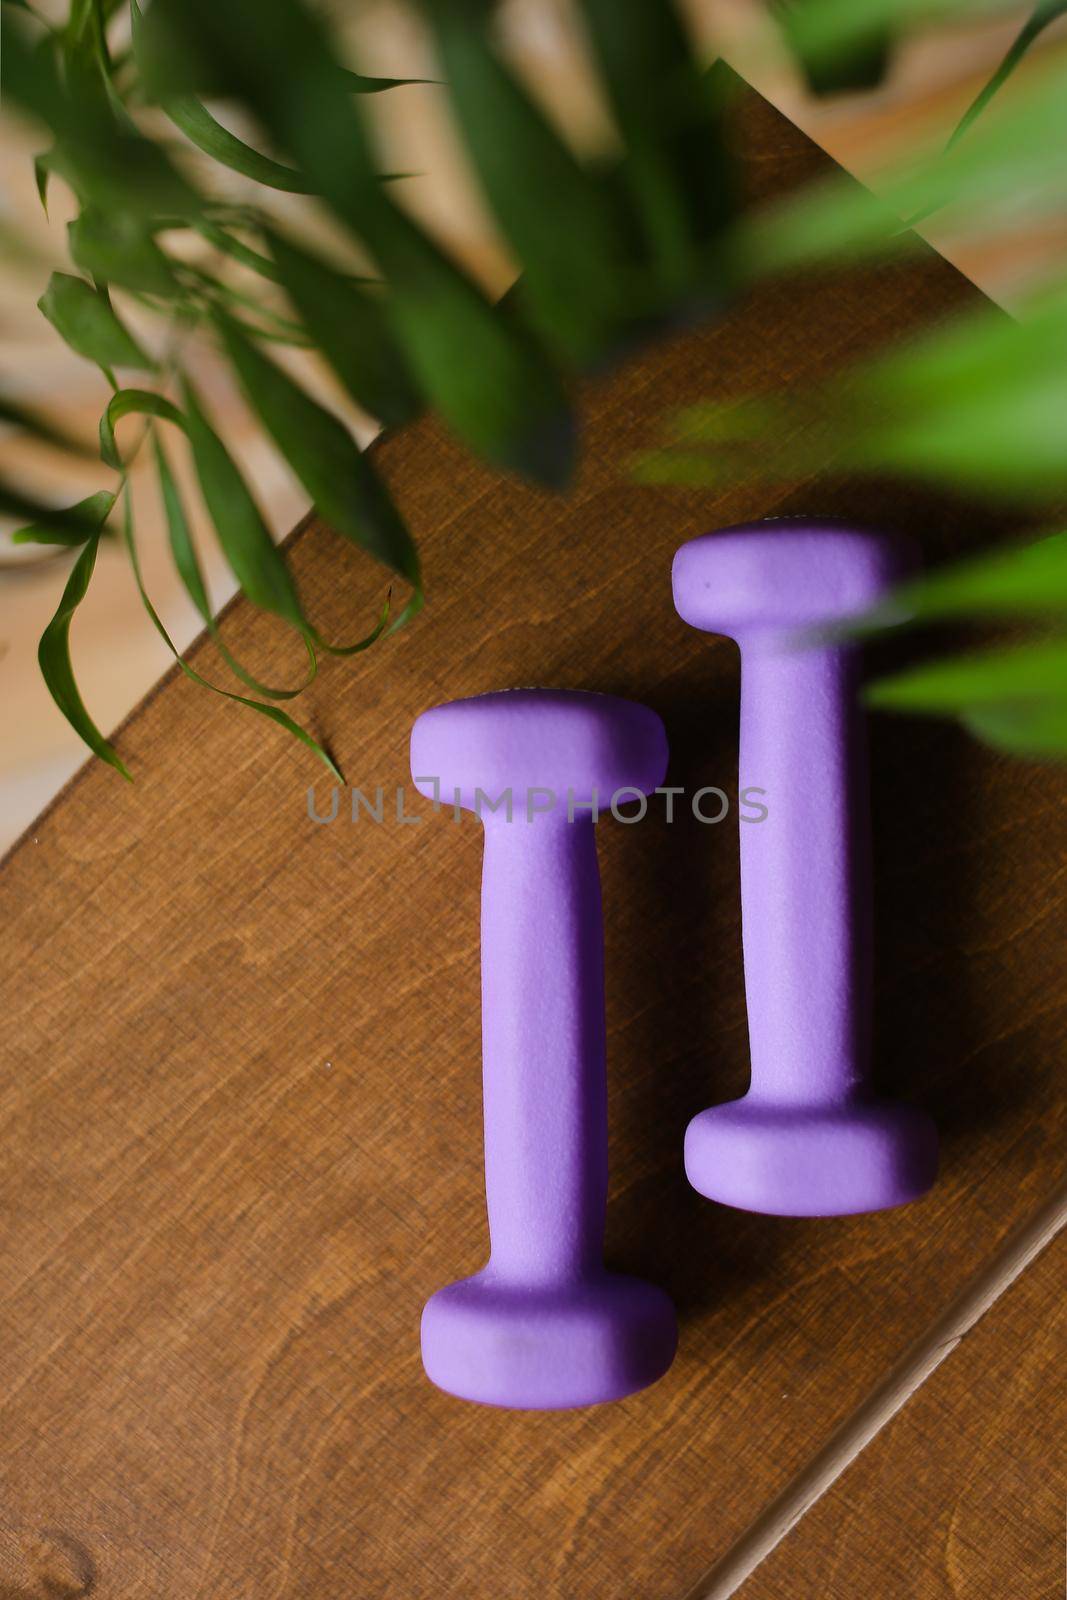 Light weight violet women dumbbells lying on wooden table. Concept of rehabilitation and sport training equipment.